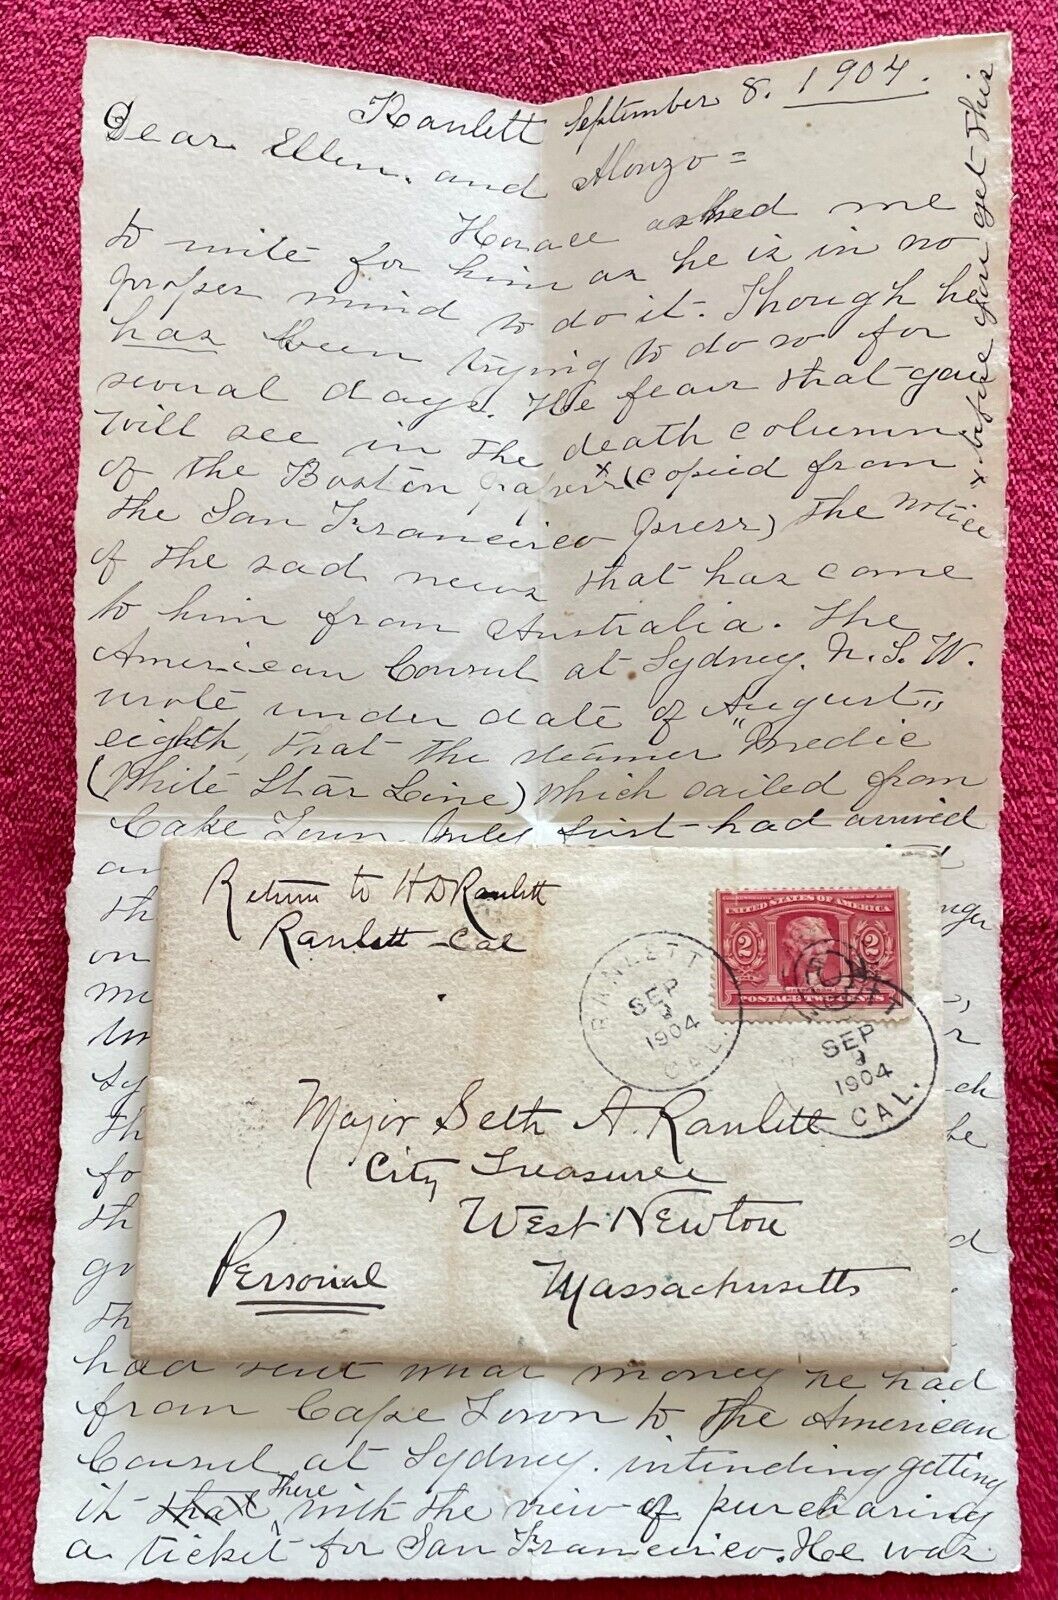 1904 LETTER TO SETH A. RANLETT-NEPHEW CHARLES MYSTERIOUS SHIPBOARD DISAPPEARANCE